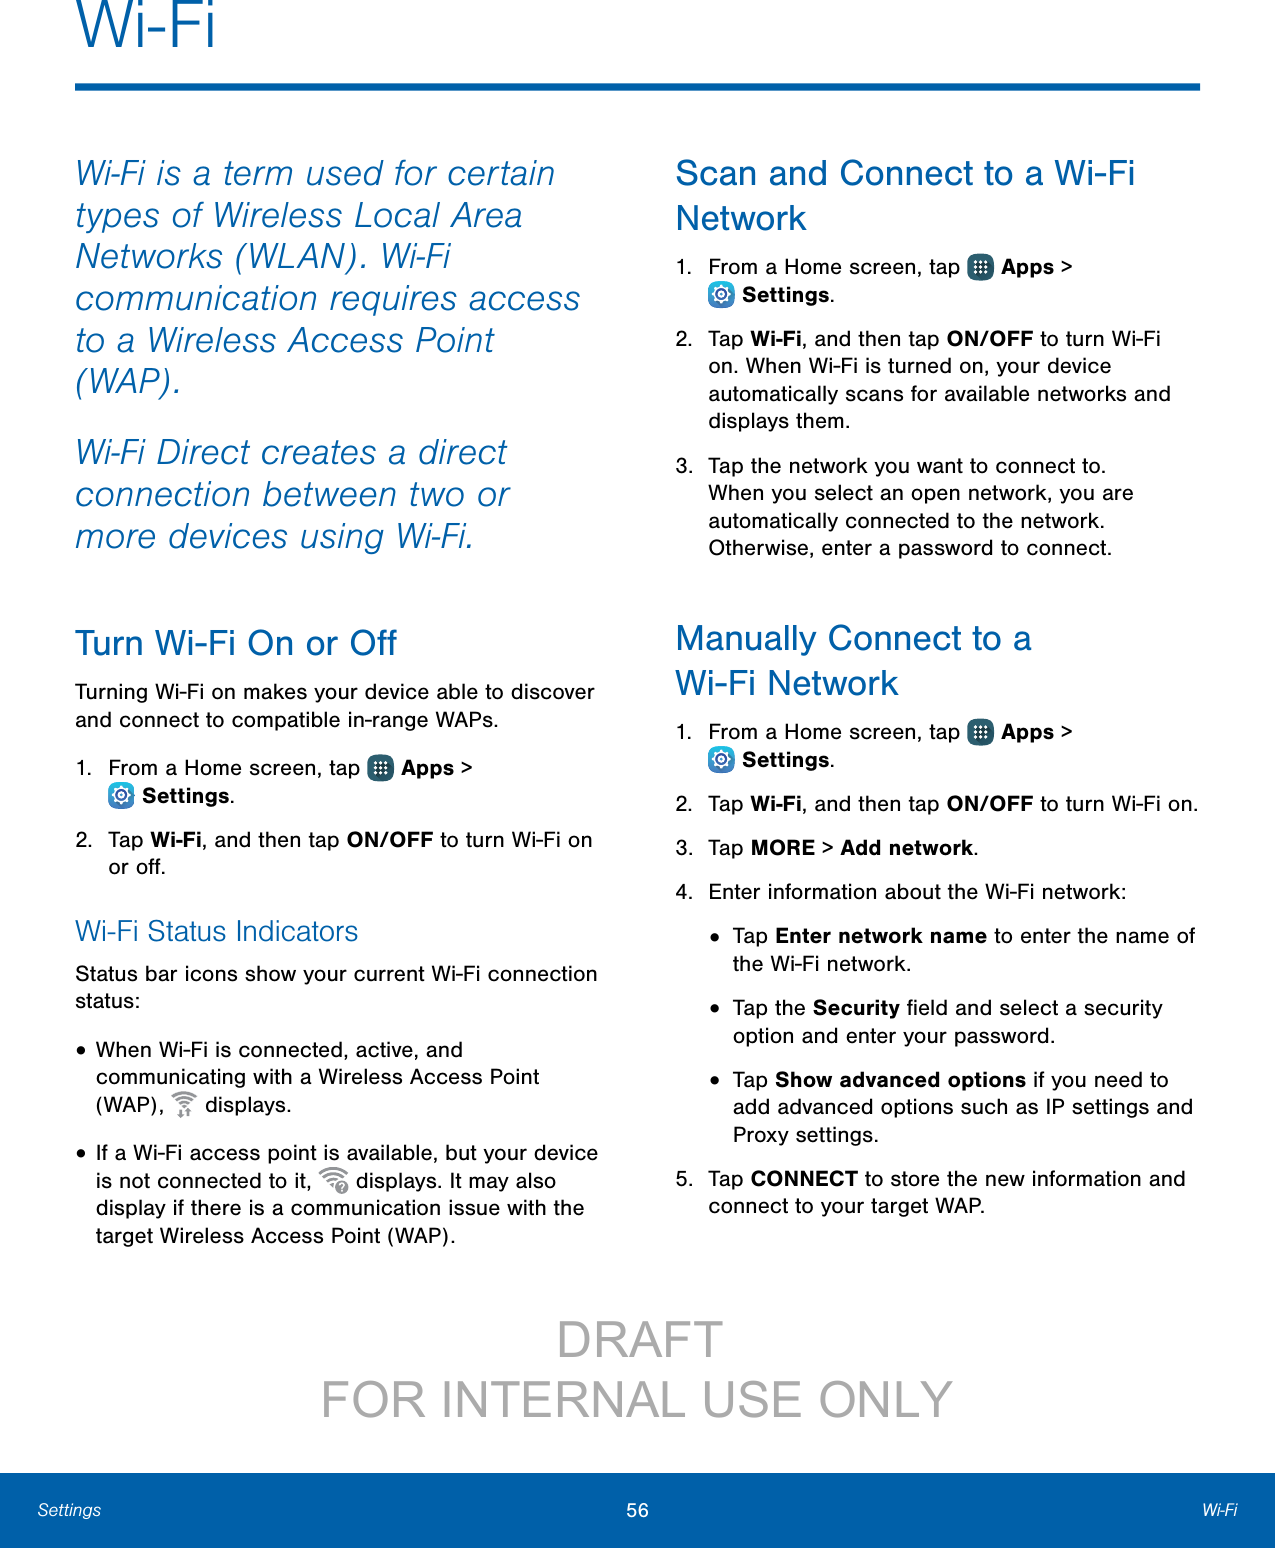 56 Wi‑FiSettingsWi‑Fi is a term used for certain types of Wireless Local Area Networks (WLAN). Wi‑Fi communication requires access to a Wireless Access Point (WAP).Wi‑Fi Direct creates a direct connection between two or more devices using Wi‑Fi. Turn Wi-Fi On or OﬀTurning Wi-Fi on makes your device able to discover and connect to compatible in-range WAPs.1.  From a Home screen, tap   Apps &gt; Settings.2.  Tap Wi-Fi, and then tap ON/OFF to turn Wi-Fi on or oﬀ.Wi-Fi Status IndicatorsStatus bar icons show your current Wi-Fi connection status:• When Wi-Fi is connected, active, and communicating with a Wireless Access Point (WAP),   displays.• If a Wi-Fi access point is available, but your device is not connected to it,   displays. It may also display if there is a communication issue with the target Wireless Access Point (WAP).Scan and Connect to a Wi-Fi Network1.  From a Home screen, tap   Apps &gt; Settings.2.  Tap Wi-Fi, and then tap ON/OFF to turn Wi-Fi on. When Wi-Fi is turned on, your device automatically scans for available networks and displays them.3.  Tap the network you want to connect to. When you select an open network, you are automatically connected to the network. Otherwise, enter a password to connect.Manually Connect to a Wi-FiNetwork1.  From a Home screen, tap   Apps &gt; Settings.2.  Tap Wi-Fi, and then tap ON/OFF to turn Wi-Fi on.3.  Tap MORE &gt; Addnetwork.4.  Enter information about the Wi-Fi network:•  Tap Enter network name to enter the name of the Wi-Fi network.•  Tap the Security ﬁeld and select a security option and enter your password.•  Tap Show advanced options if you need to add advanced options such as IPsettings and Proxy settings.5.  Tap CONNECT to store the new information and connect to your target WAP.Wi-Fi                 DRAFT FOR INTERNAL USE ONLY